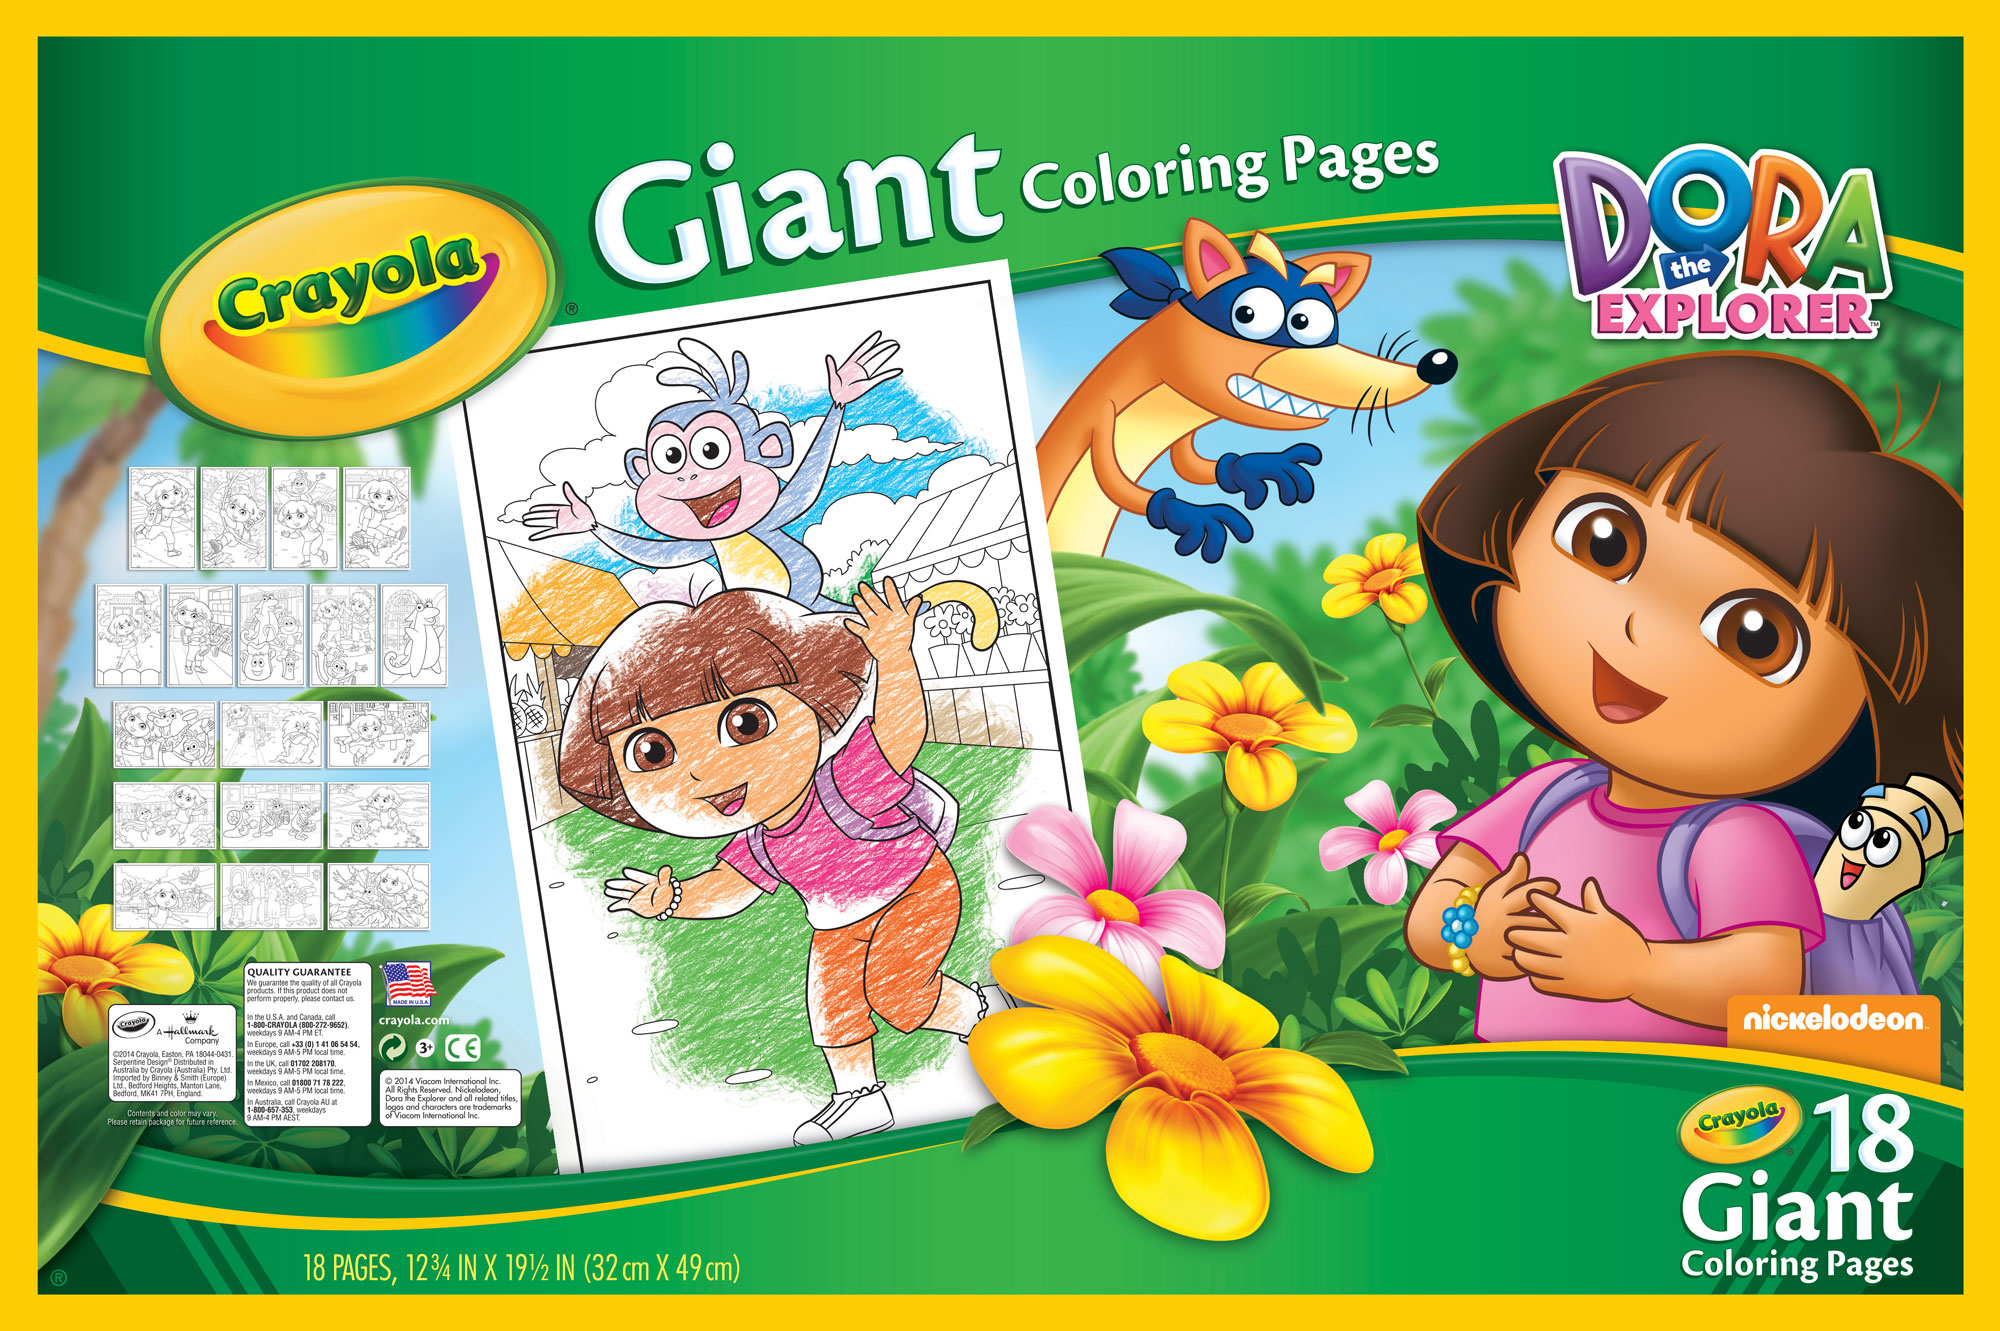 Giant Coloring Pages - Dora the Explorer | Crayola